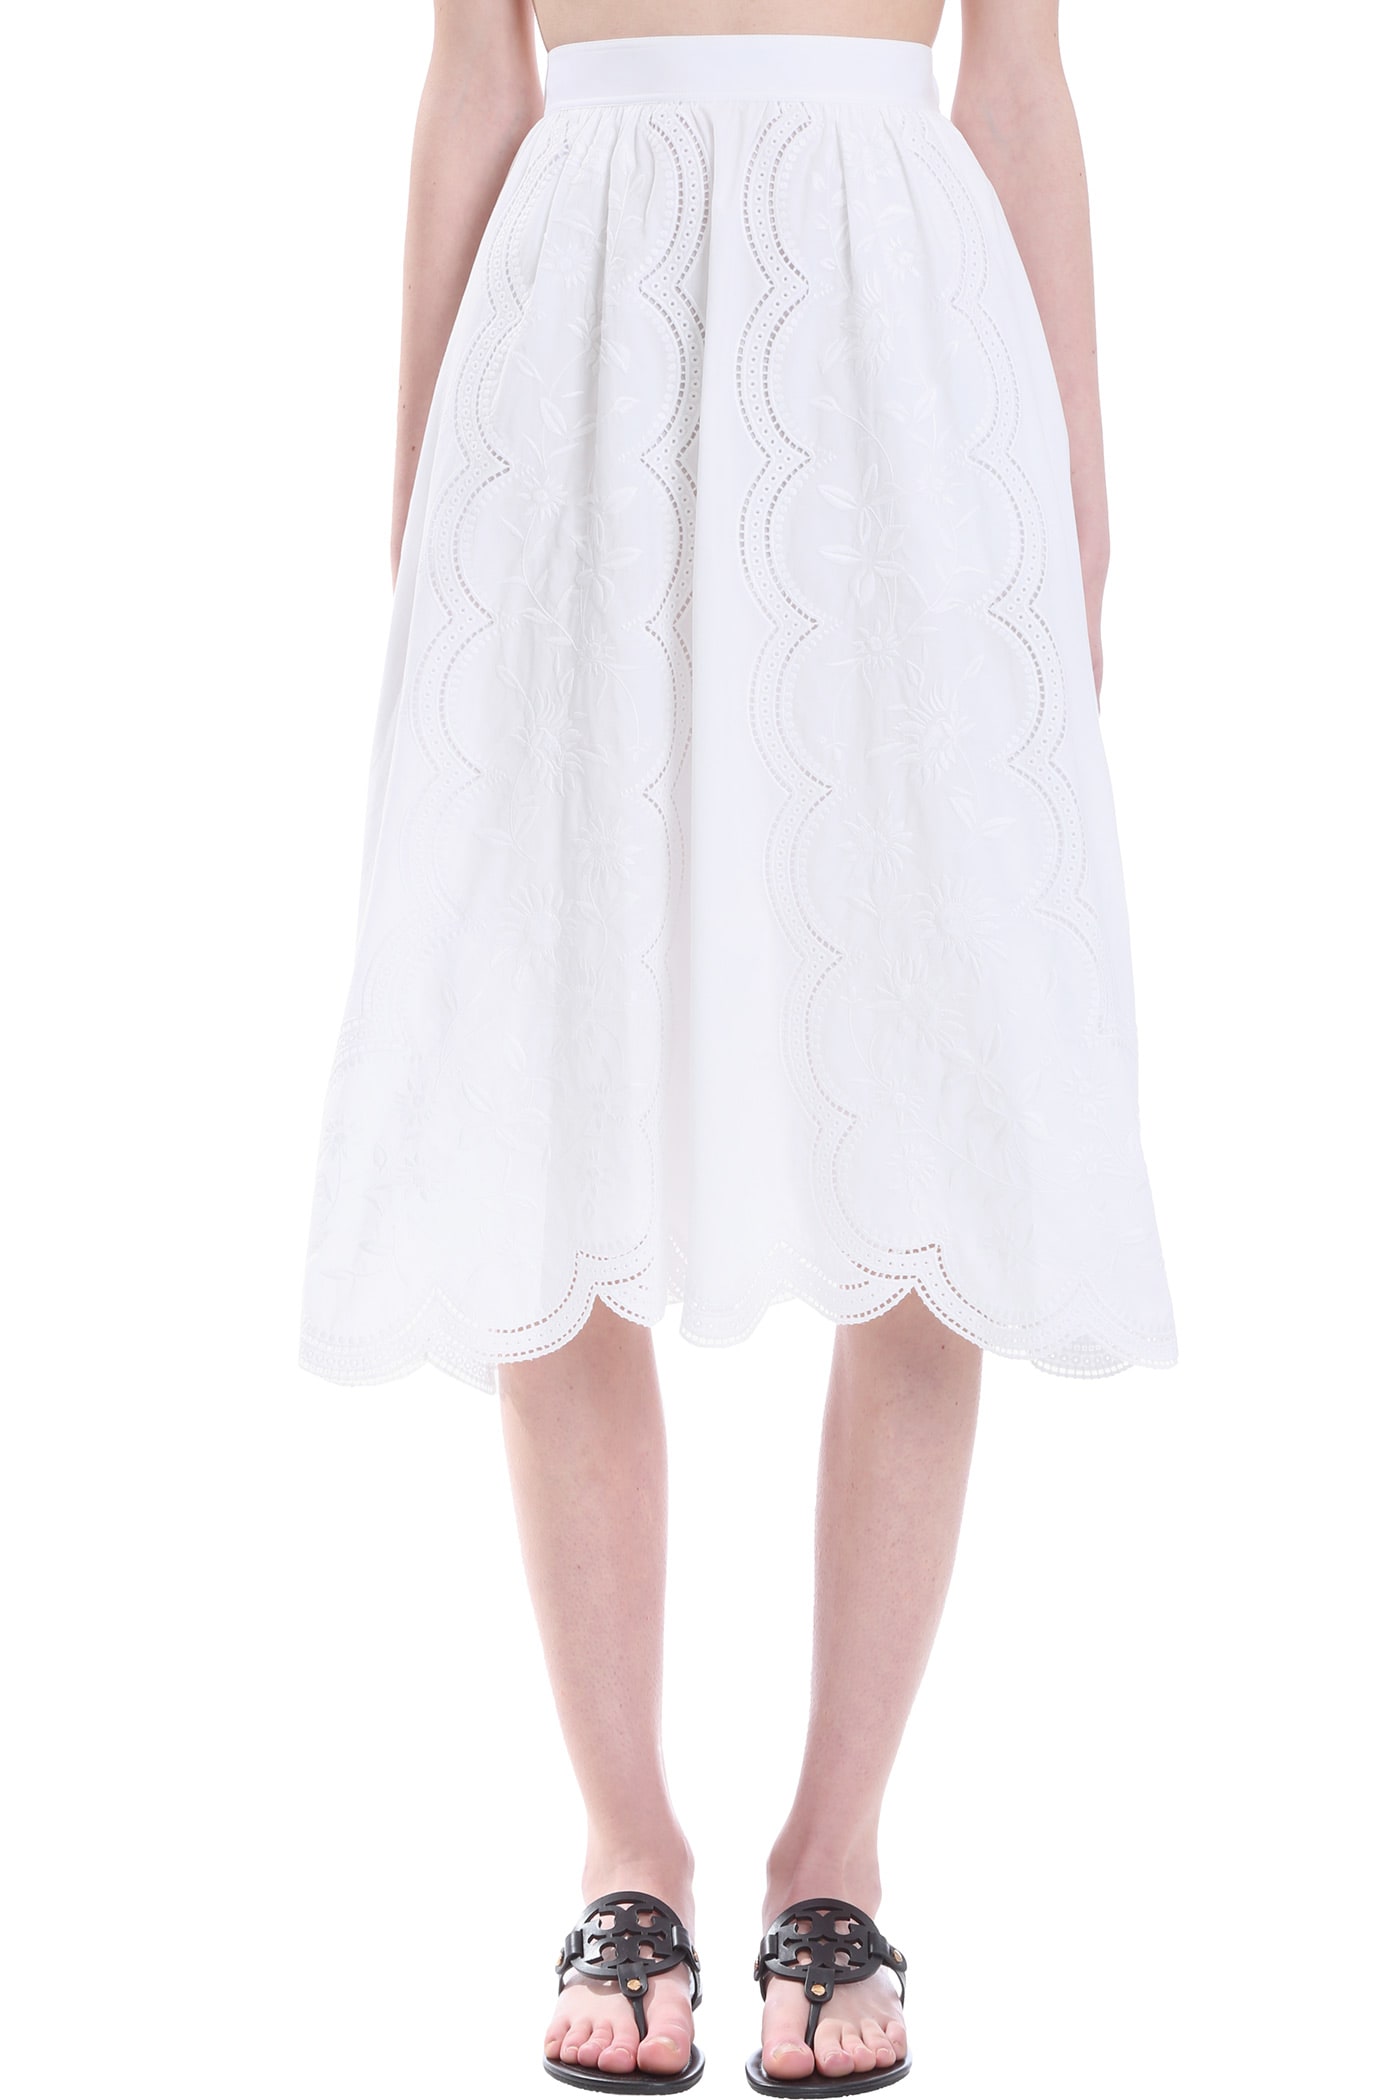 Tory Burch Skirt In White Polyester